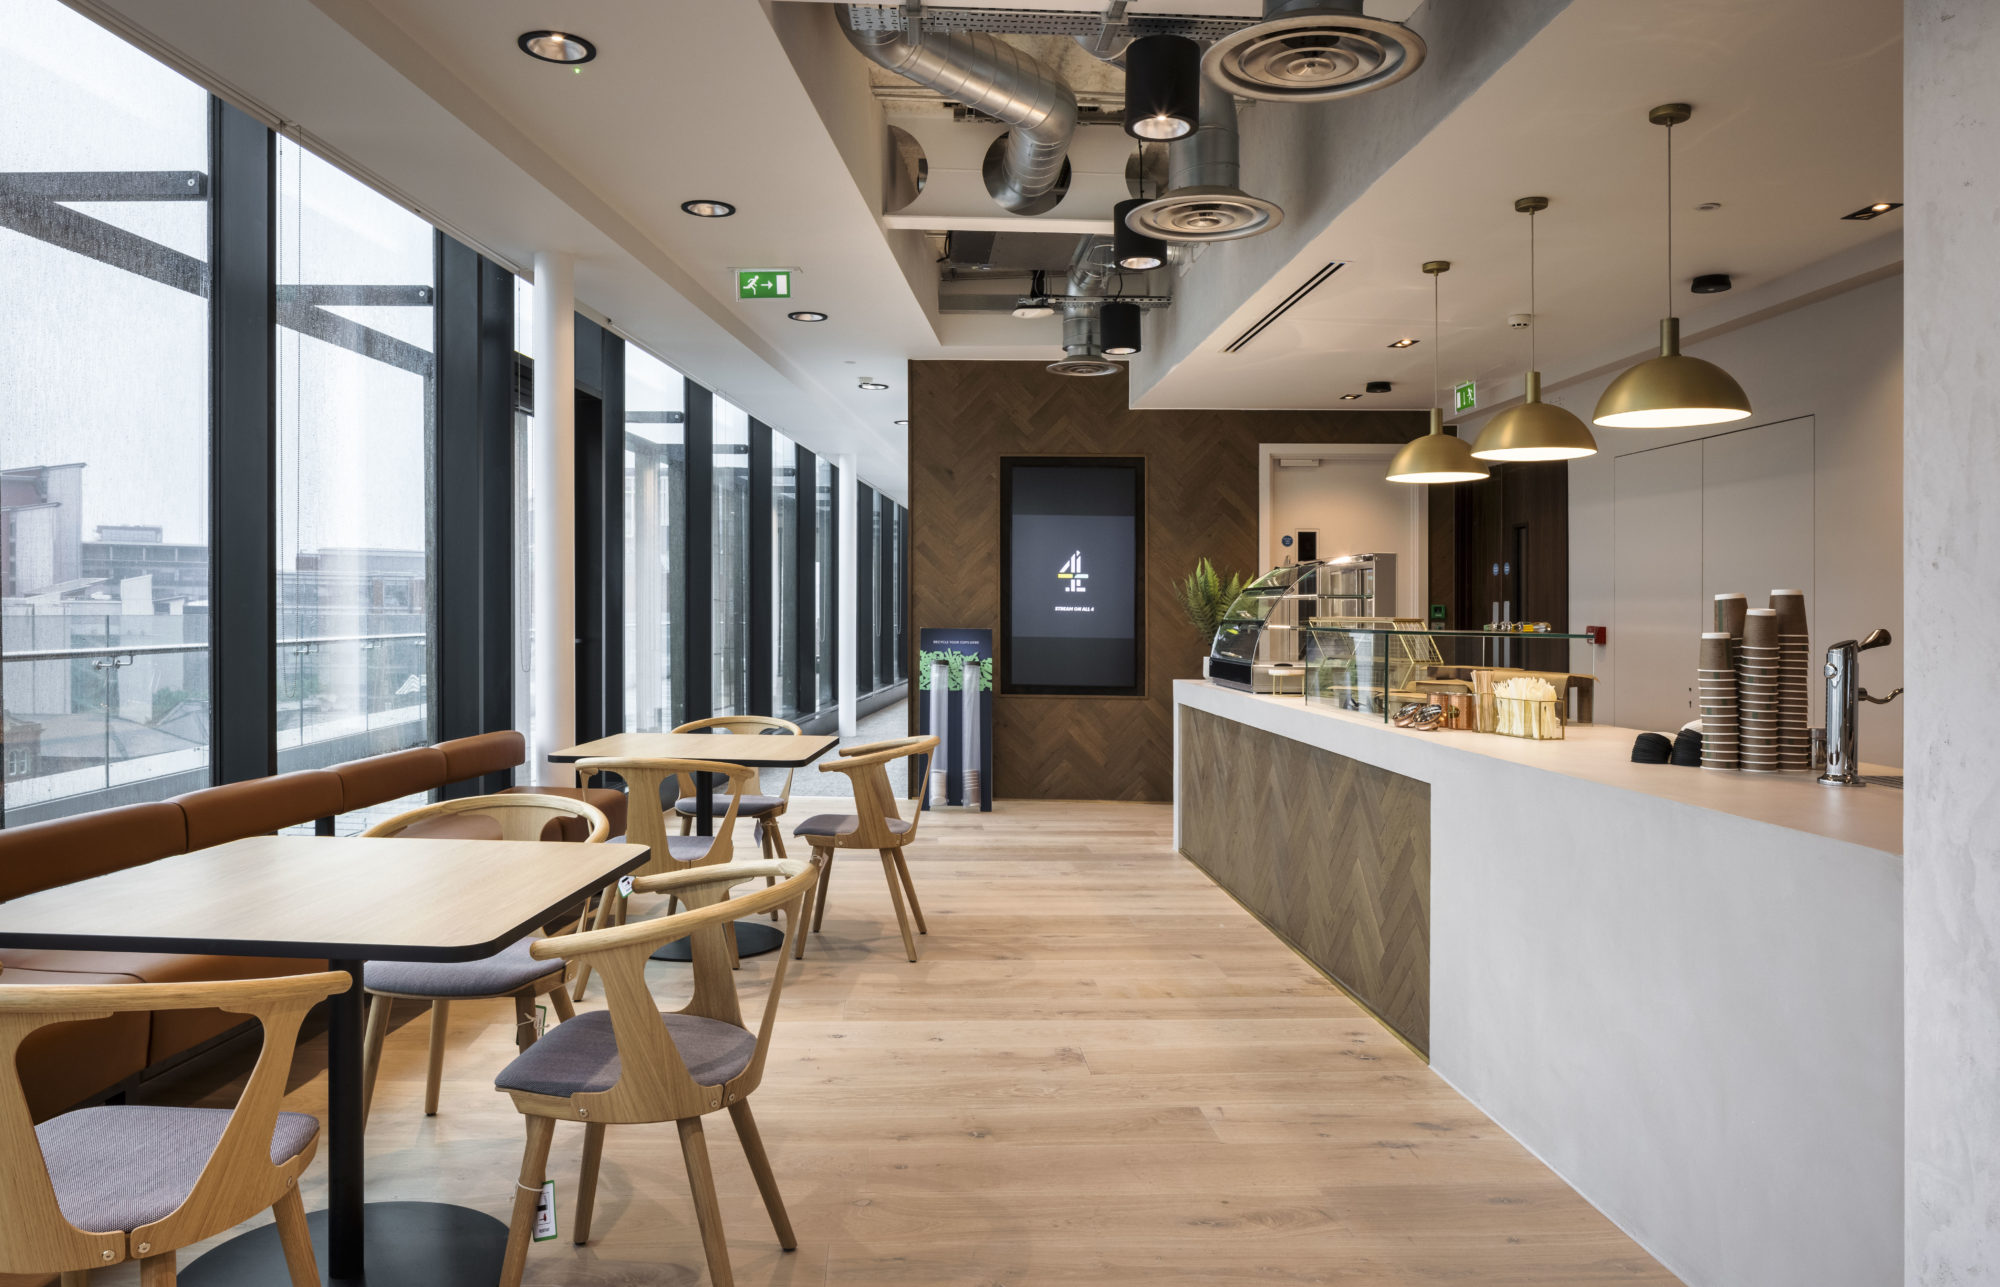 Channel 4 office kitchen fit out